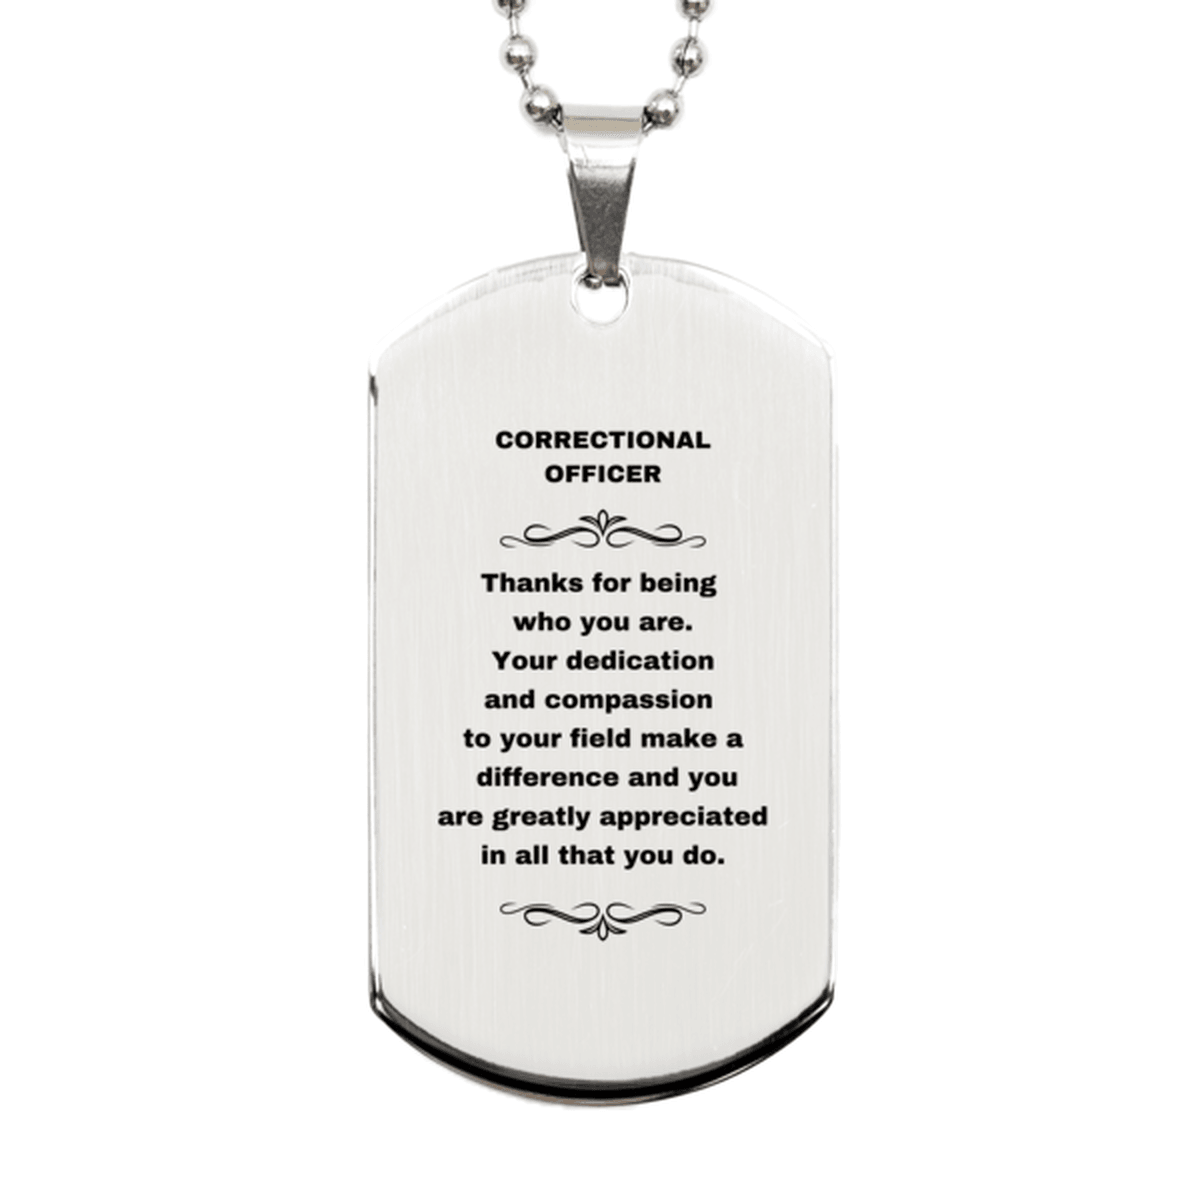 Correctional Officer Silver Dog Tag Engraved Necklace - Thanks for being who you are - Birthday Christmas Jewelry Gifts Coworkers Colleague Boss - Mallard Moon Gift Shop